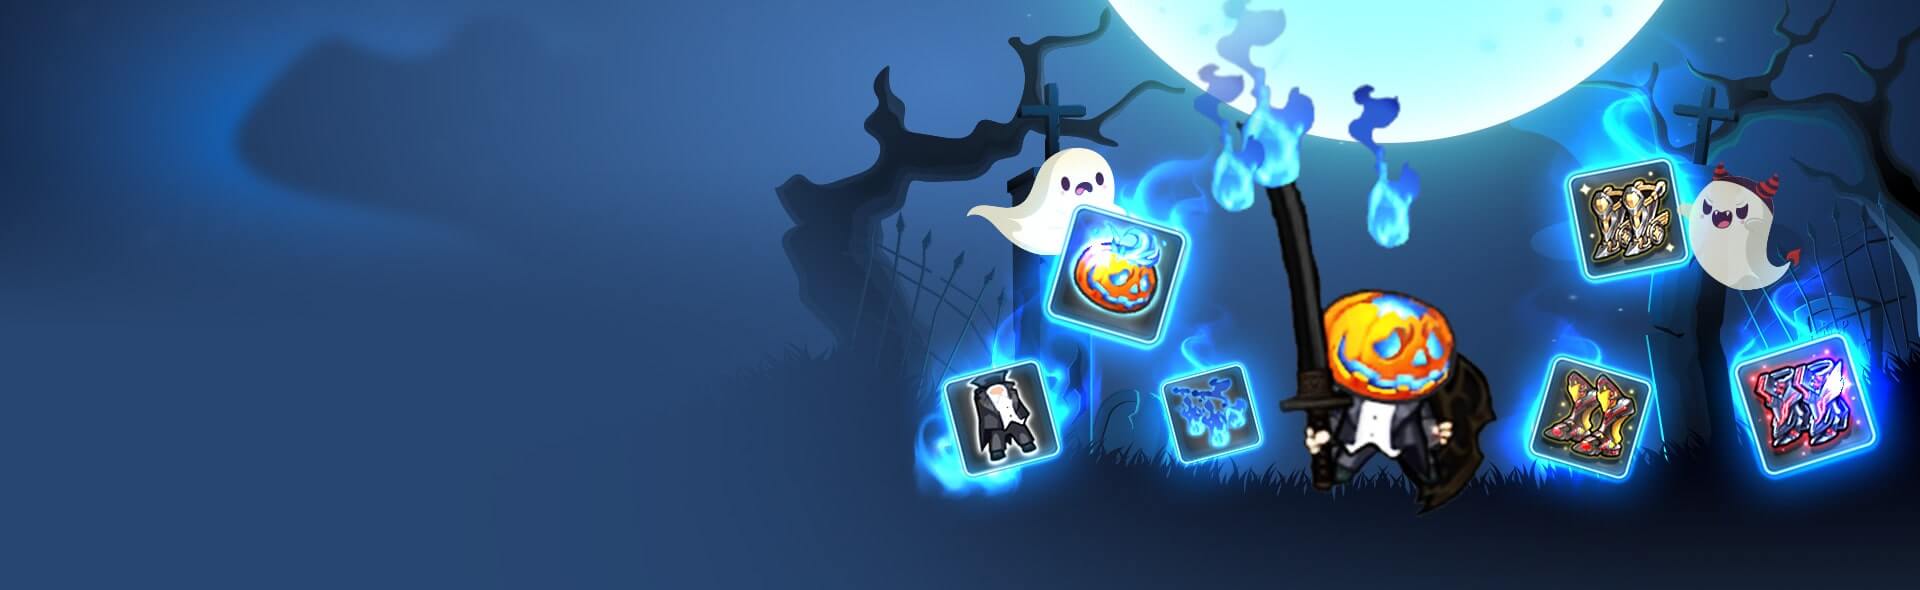 Bright flickering lights in the night,<br />The Jack-o-Lantern will surely give you a fright.<br />Update 1.32.1 now up!